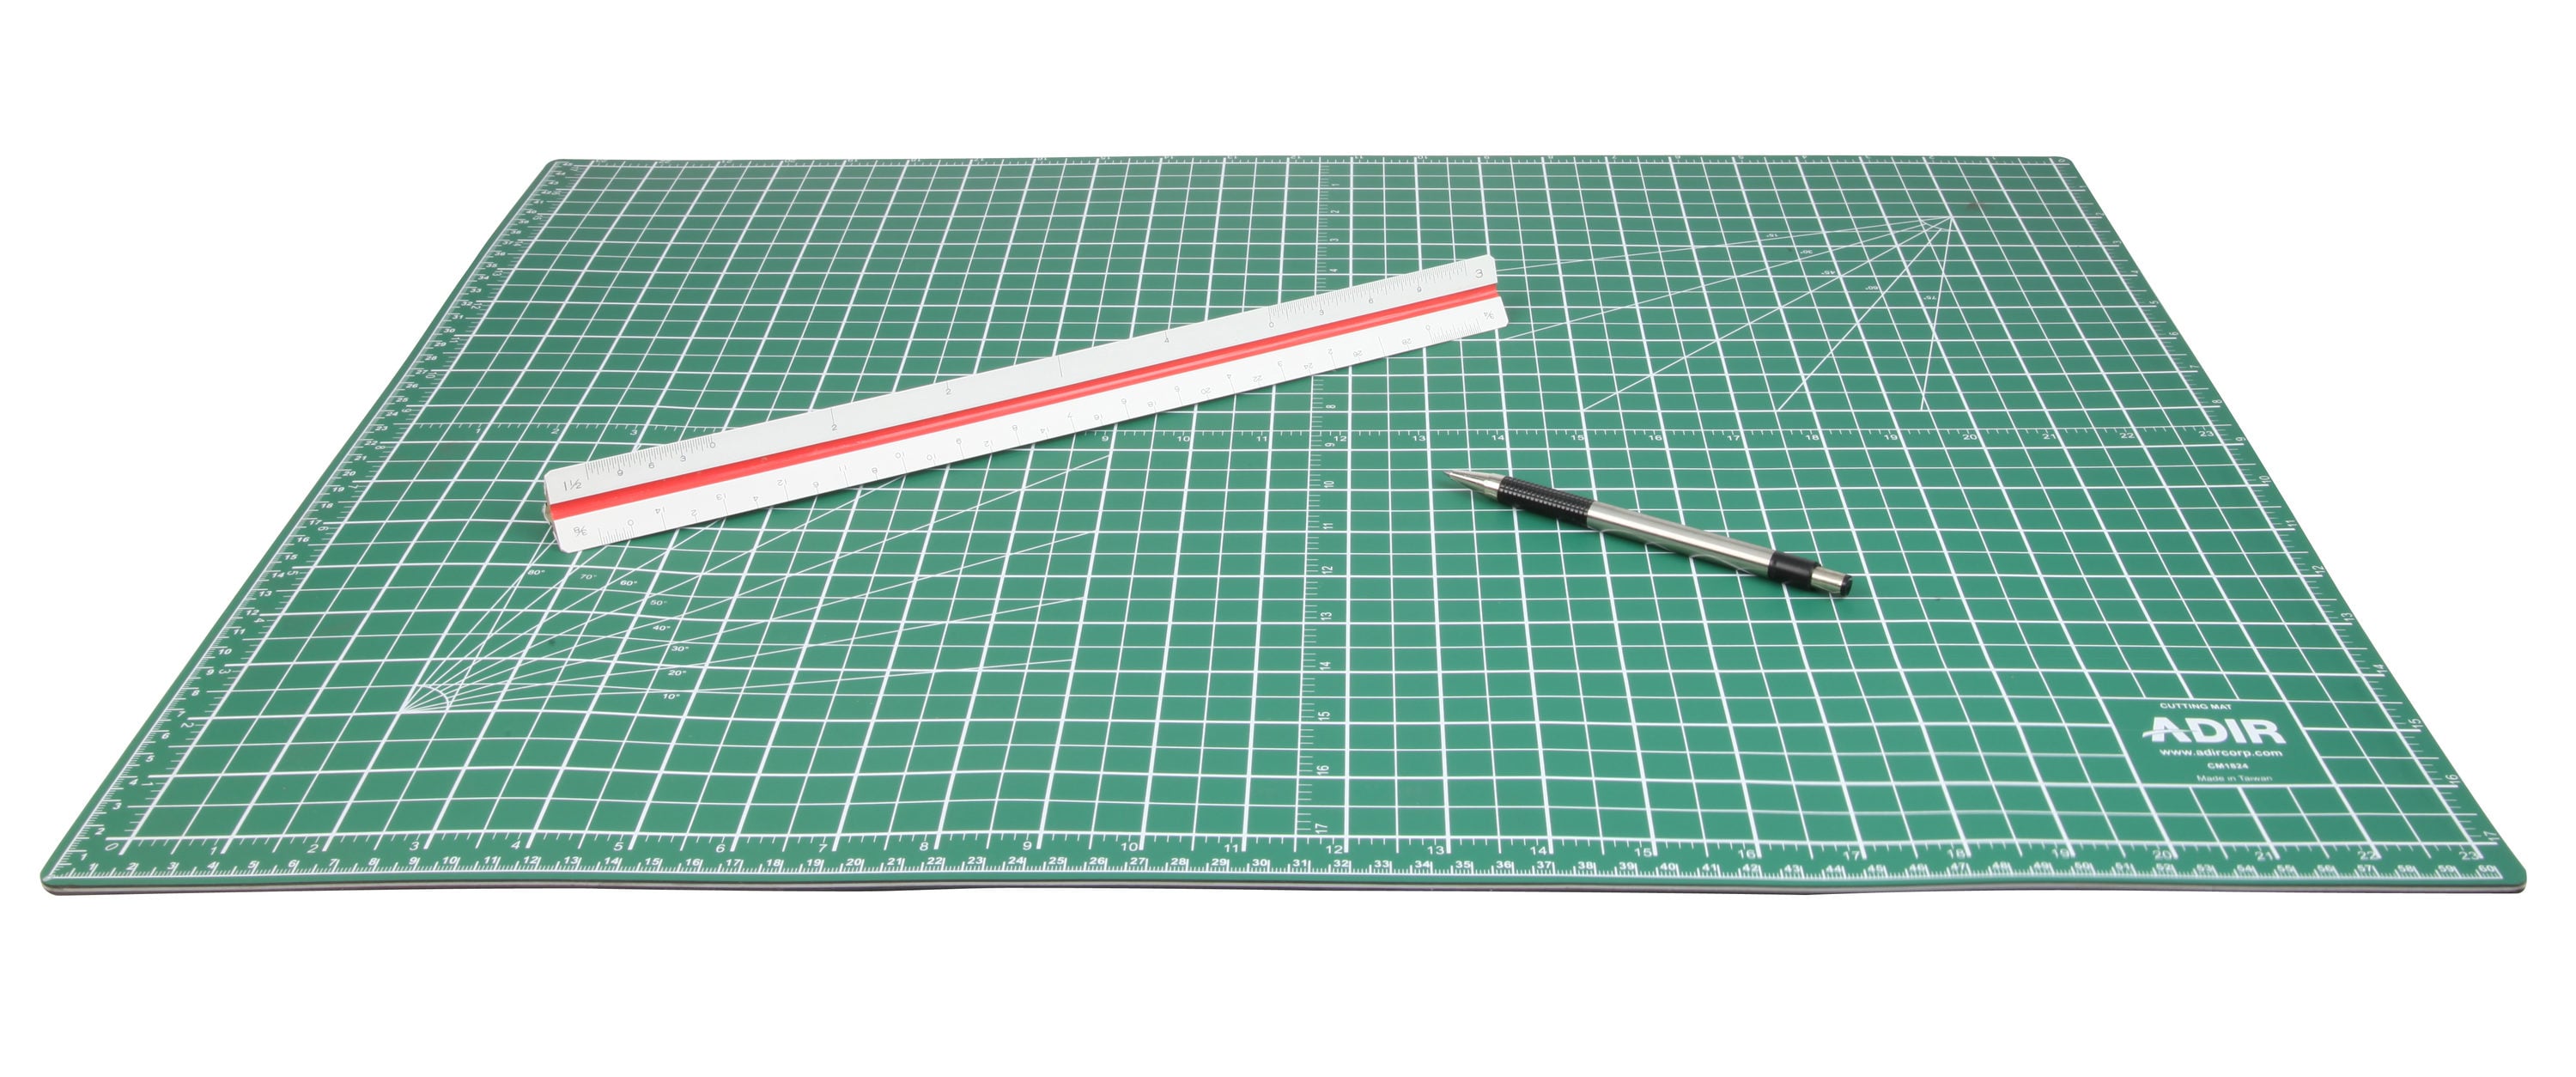 Post Consumer Recycled Large Cutting Mat, 18 x 24, Green